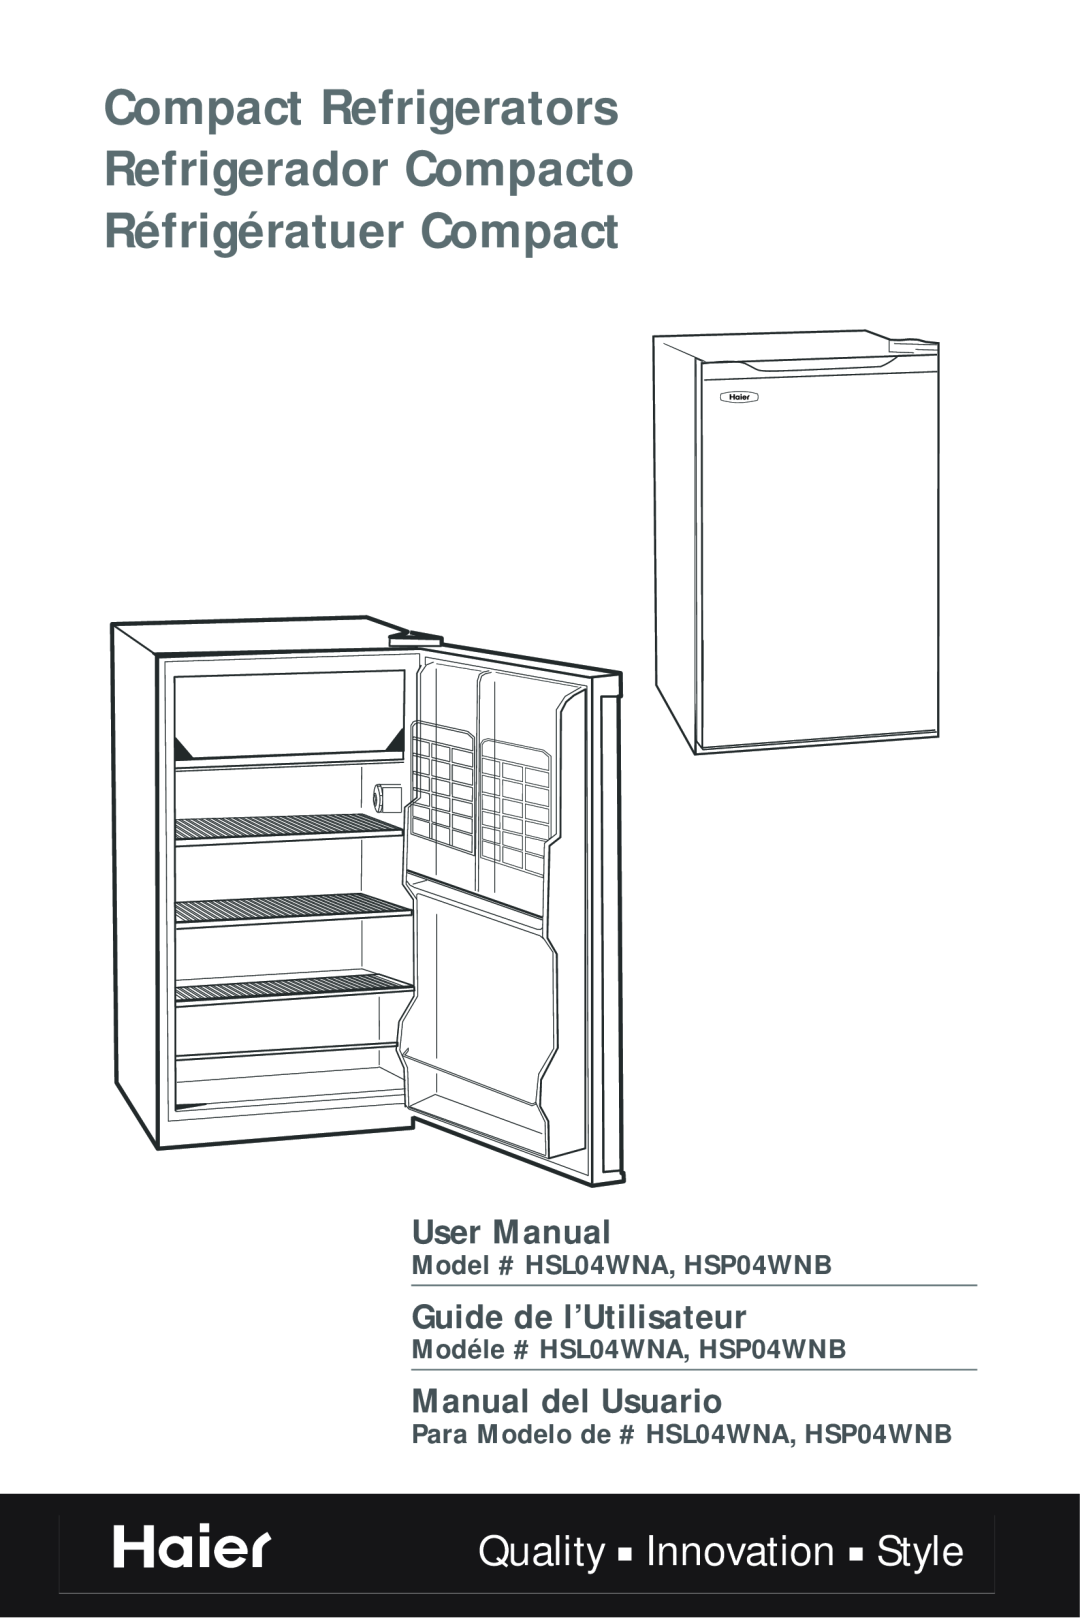 Haier HSP04WNB user manual Compact Refrigerators Refrigerador Compacto Réfrigératuer Compact, Quality Innovation Style 